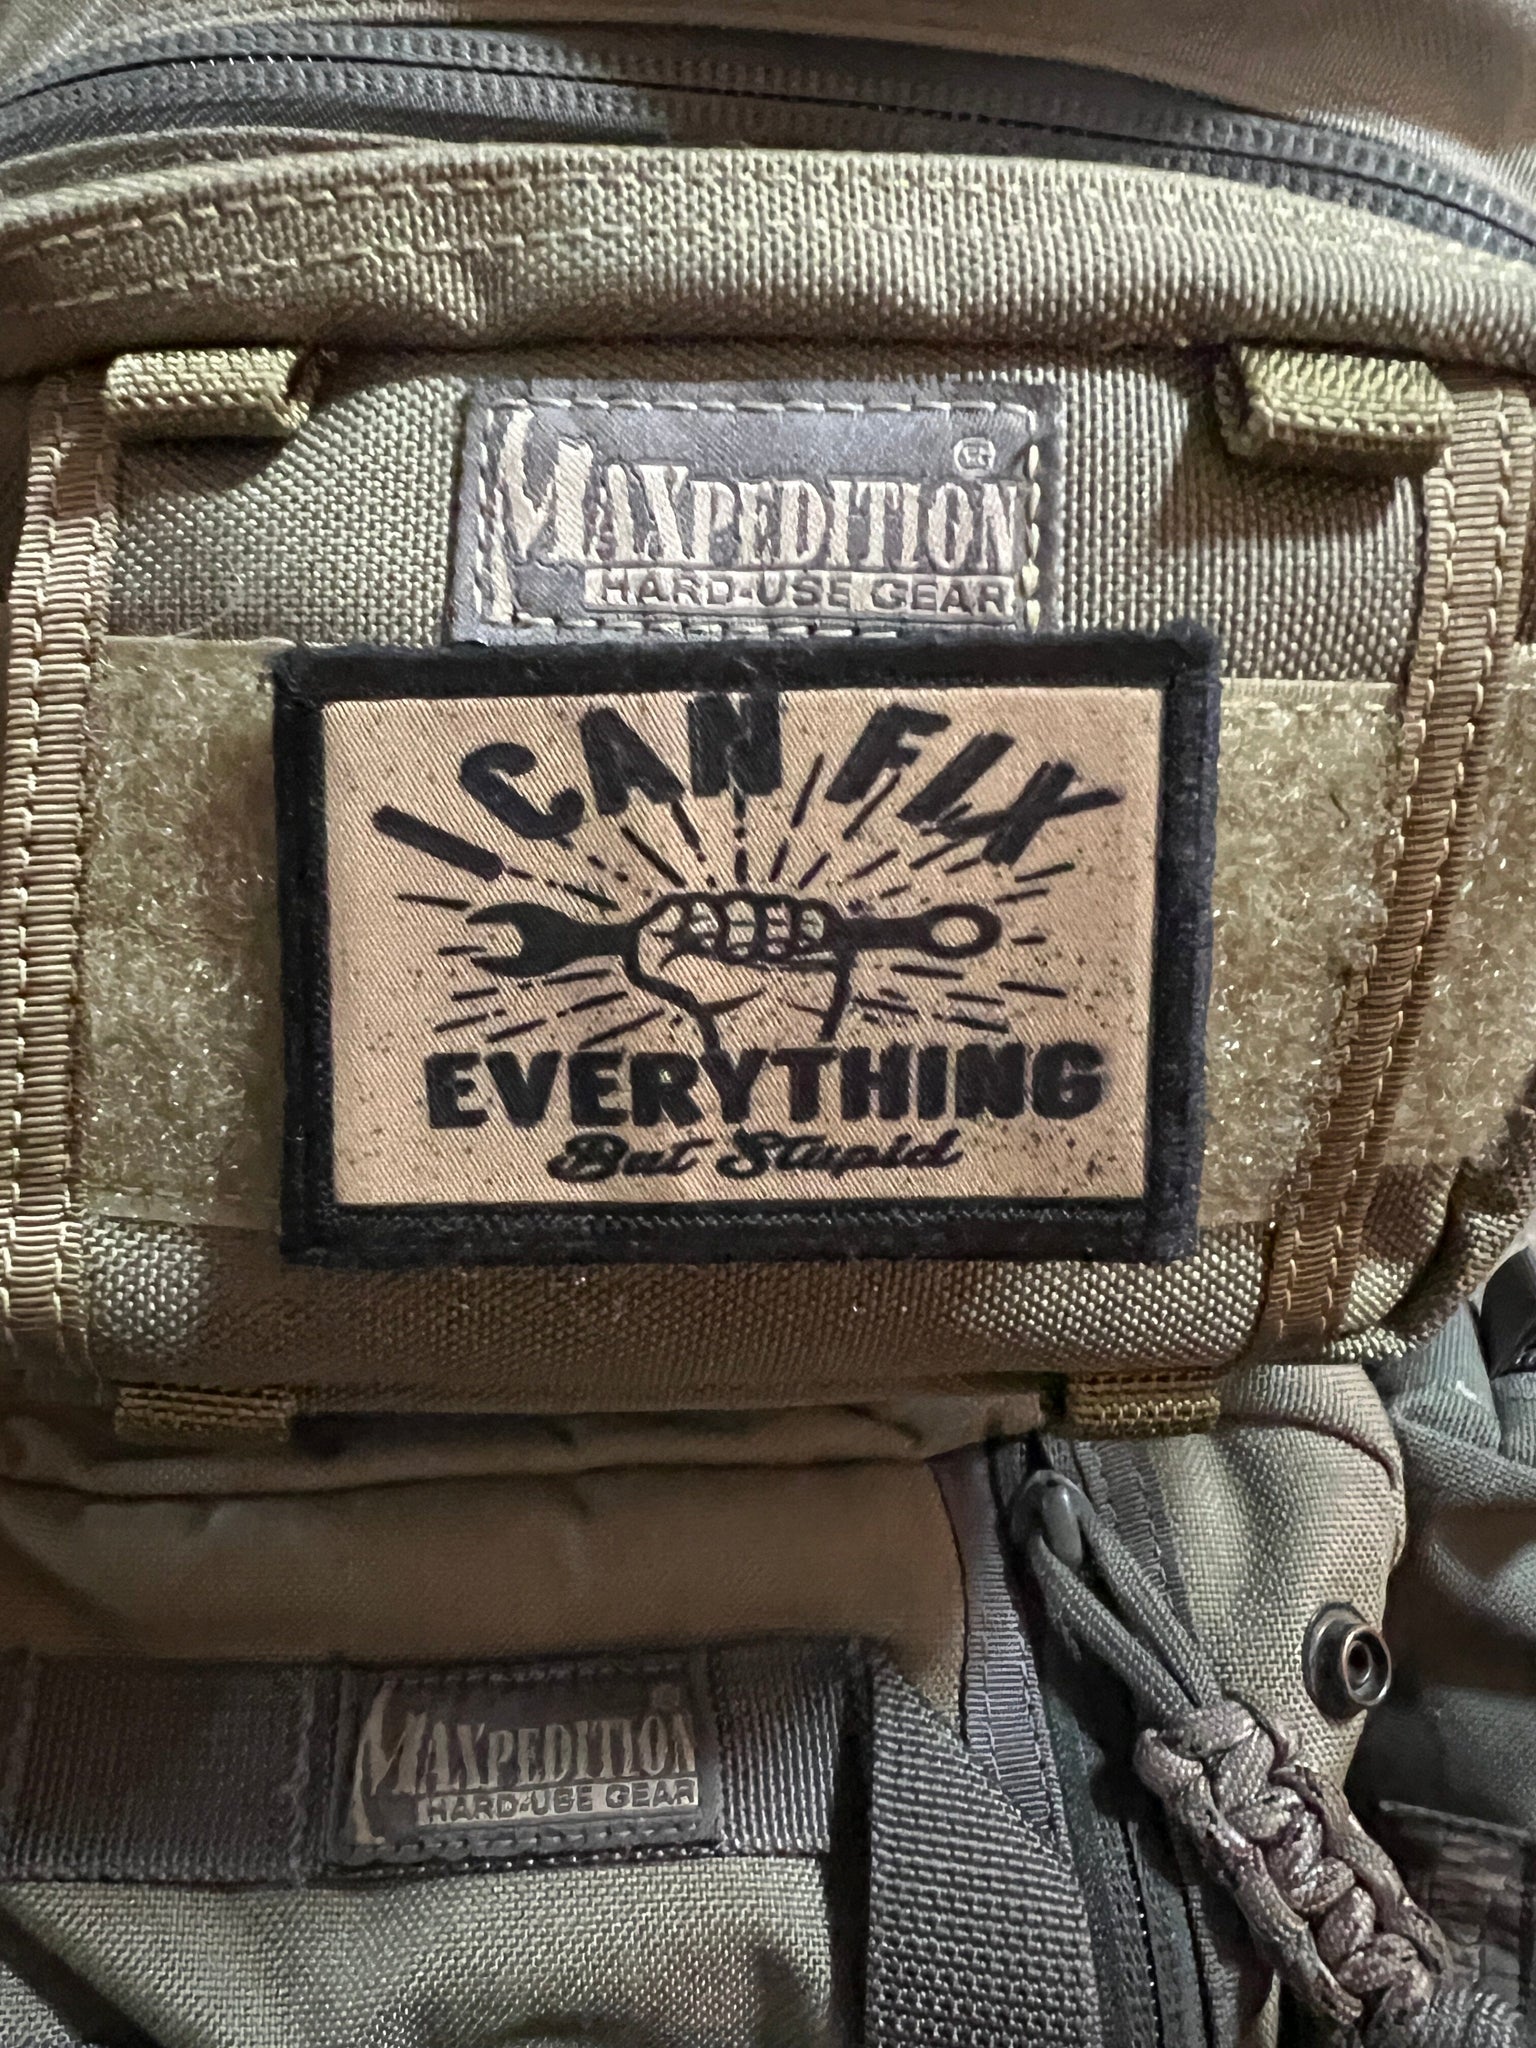 This Just in, You're and Idiot Tactical Military Morale Patch Funny 2x3